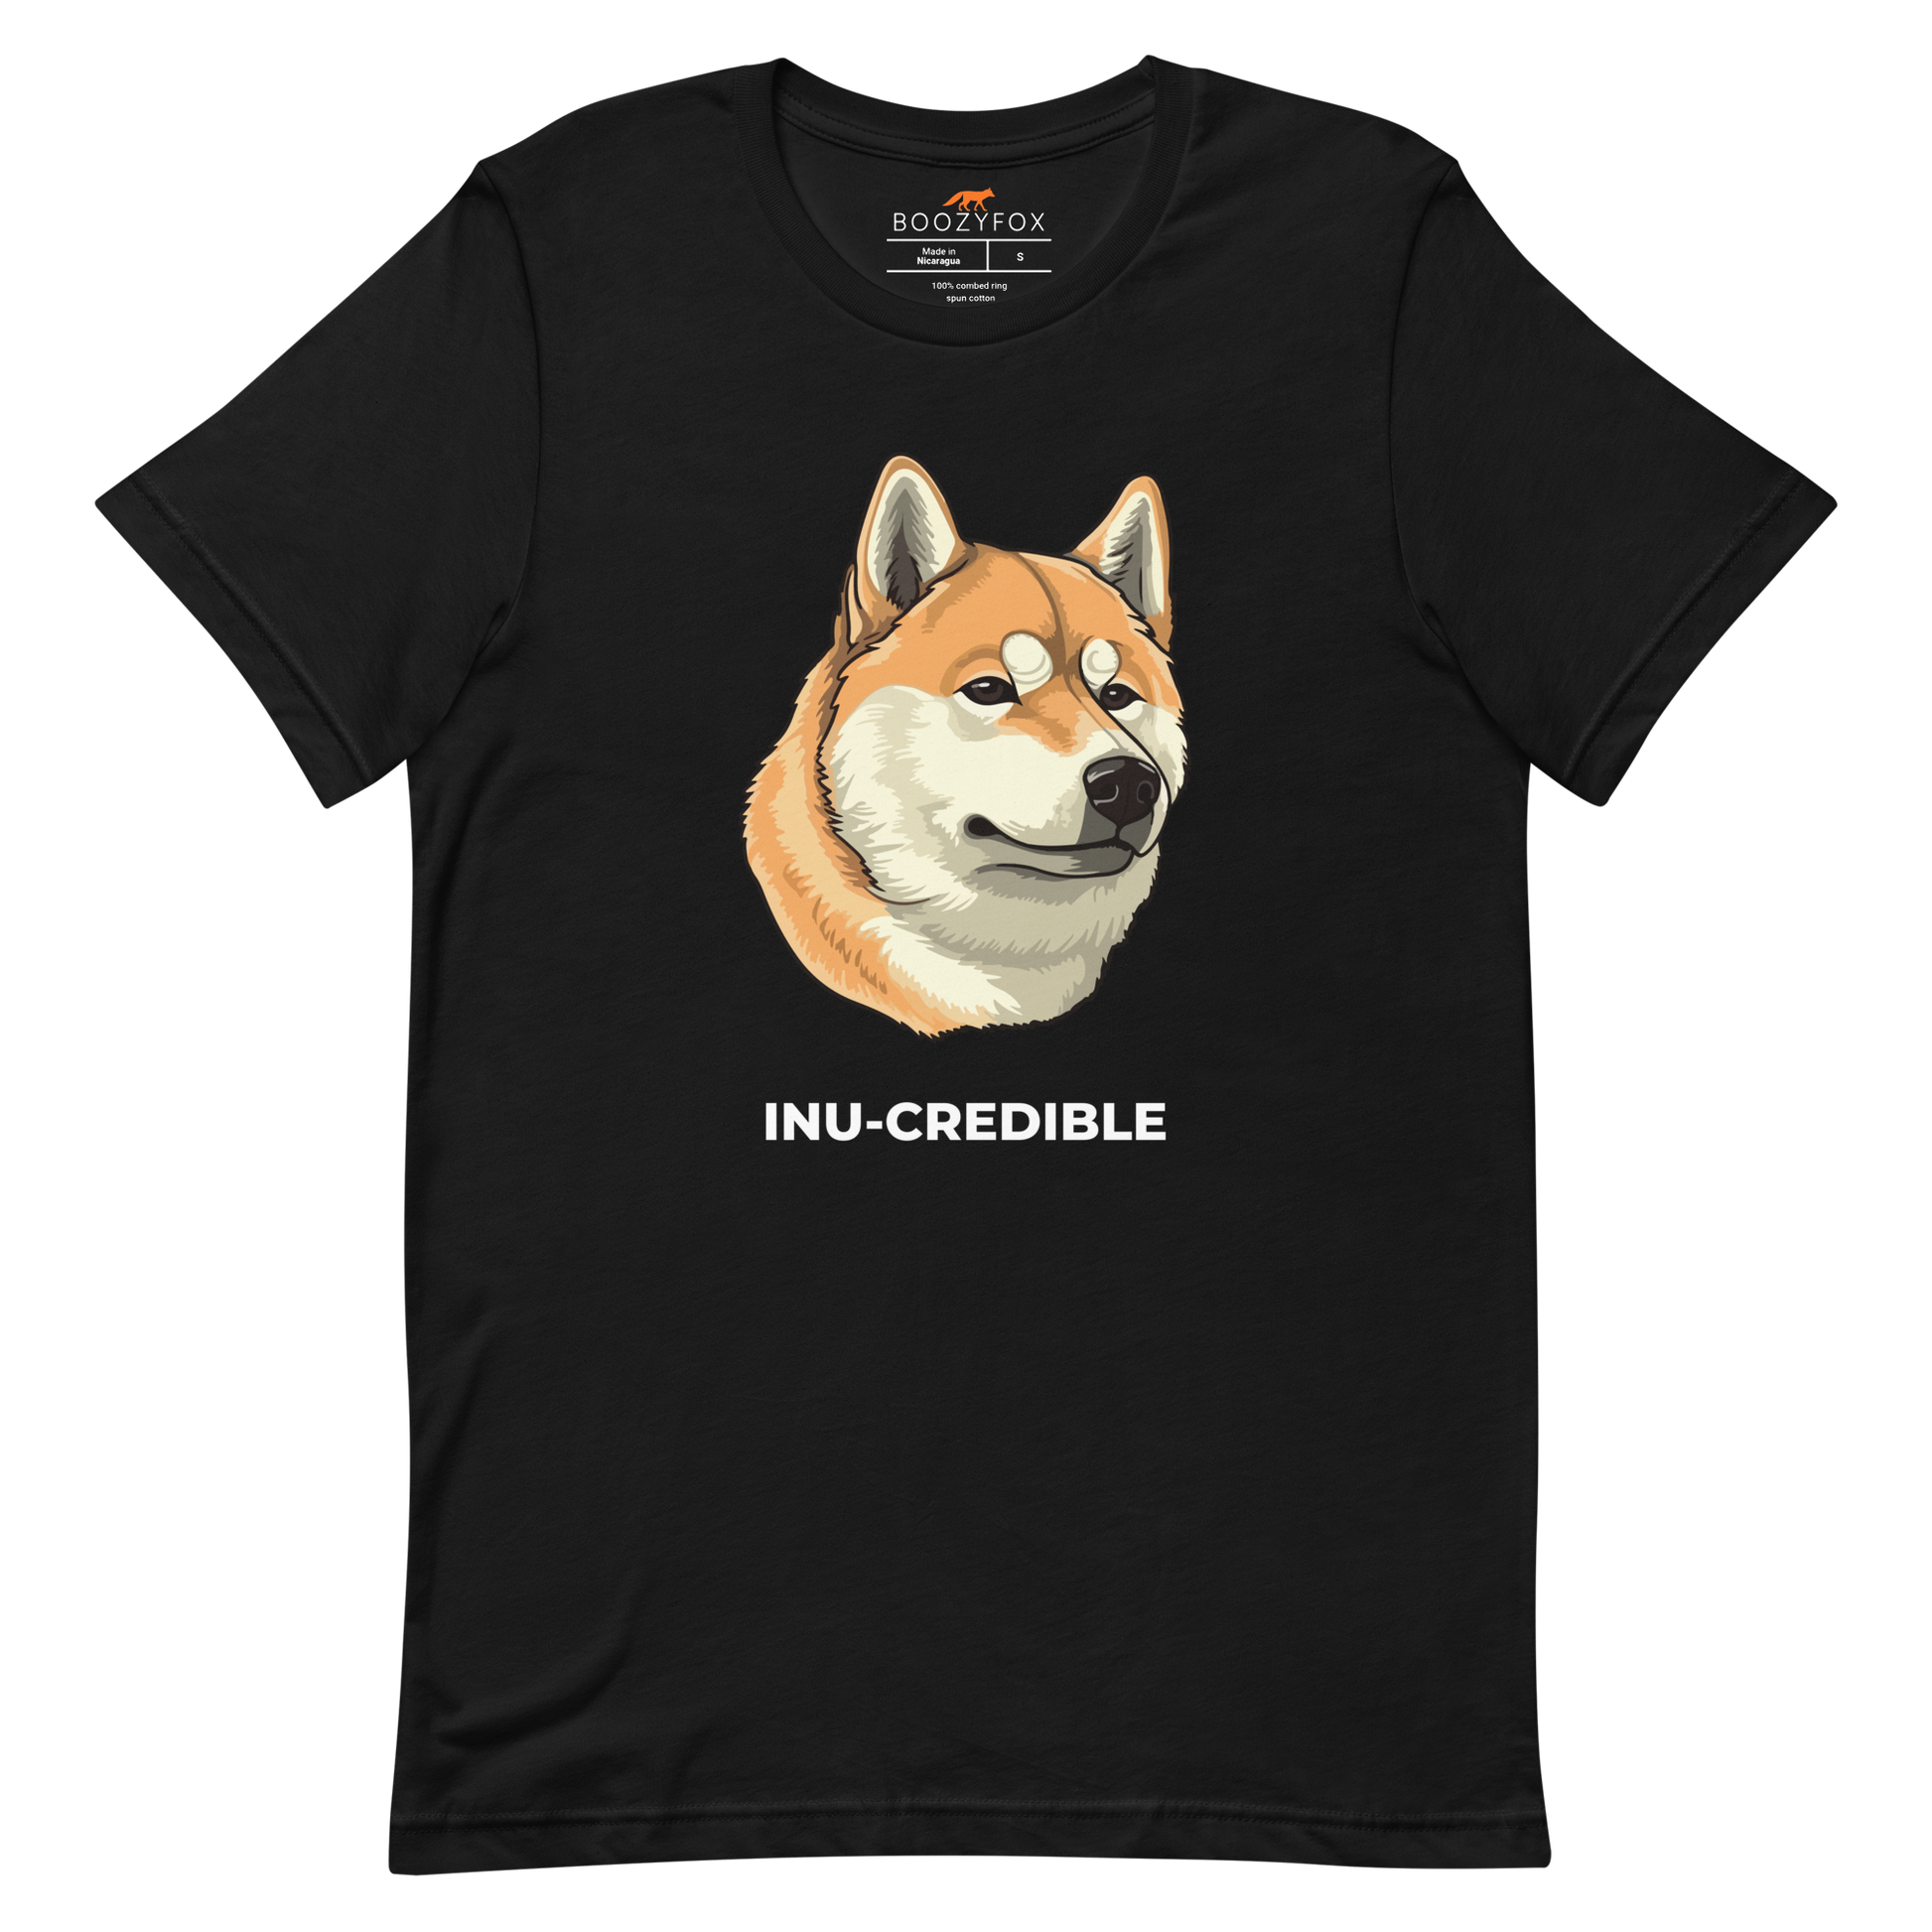 Black Premium Shiba Inu T-Shirt featuring the Inu-Credible graphic on the chest - Funny Graphic Shiba Inu Tees - Boozy Fox